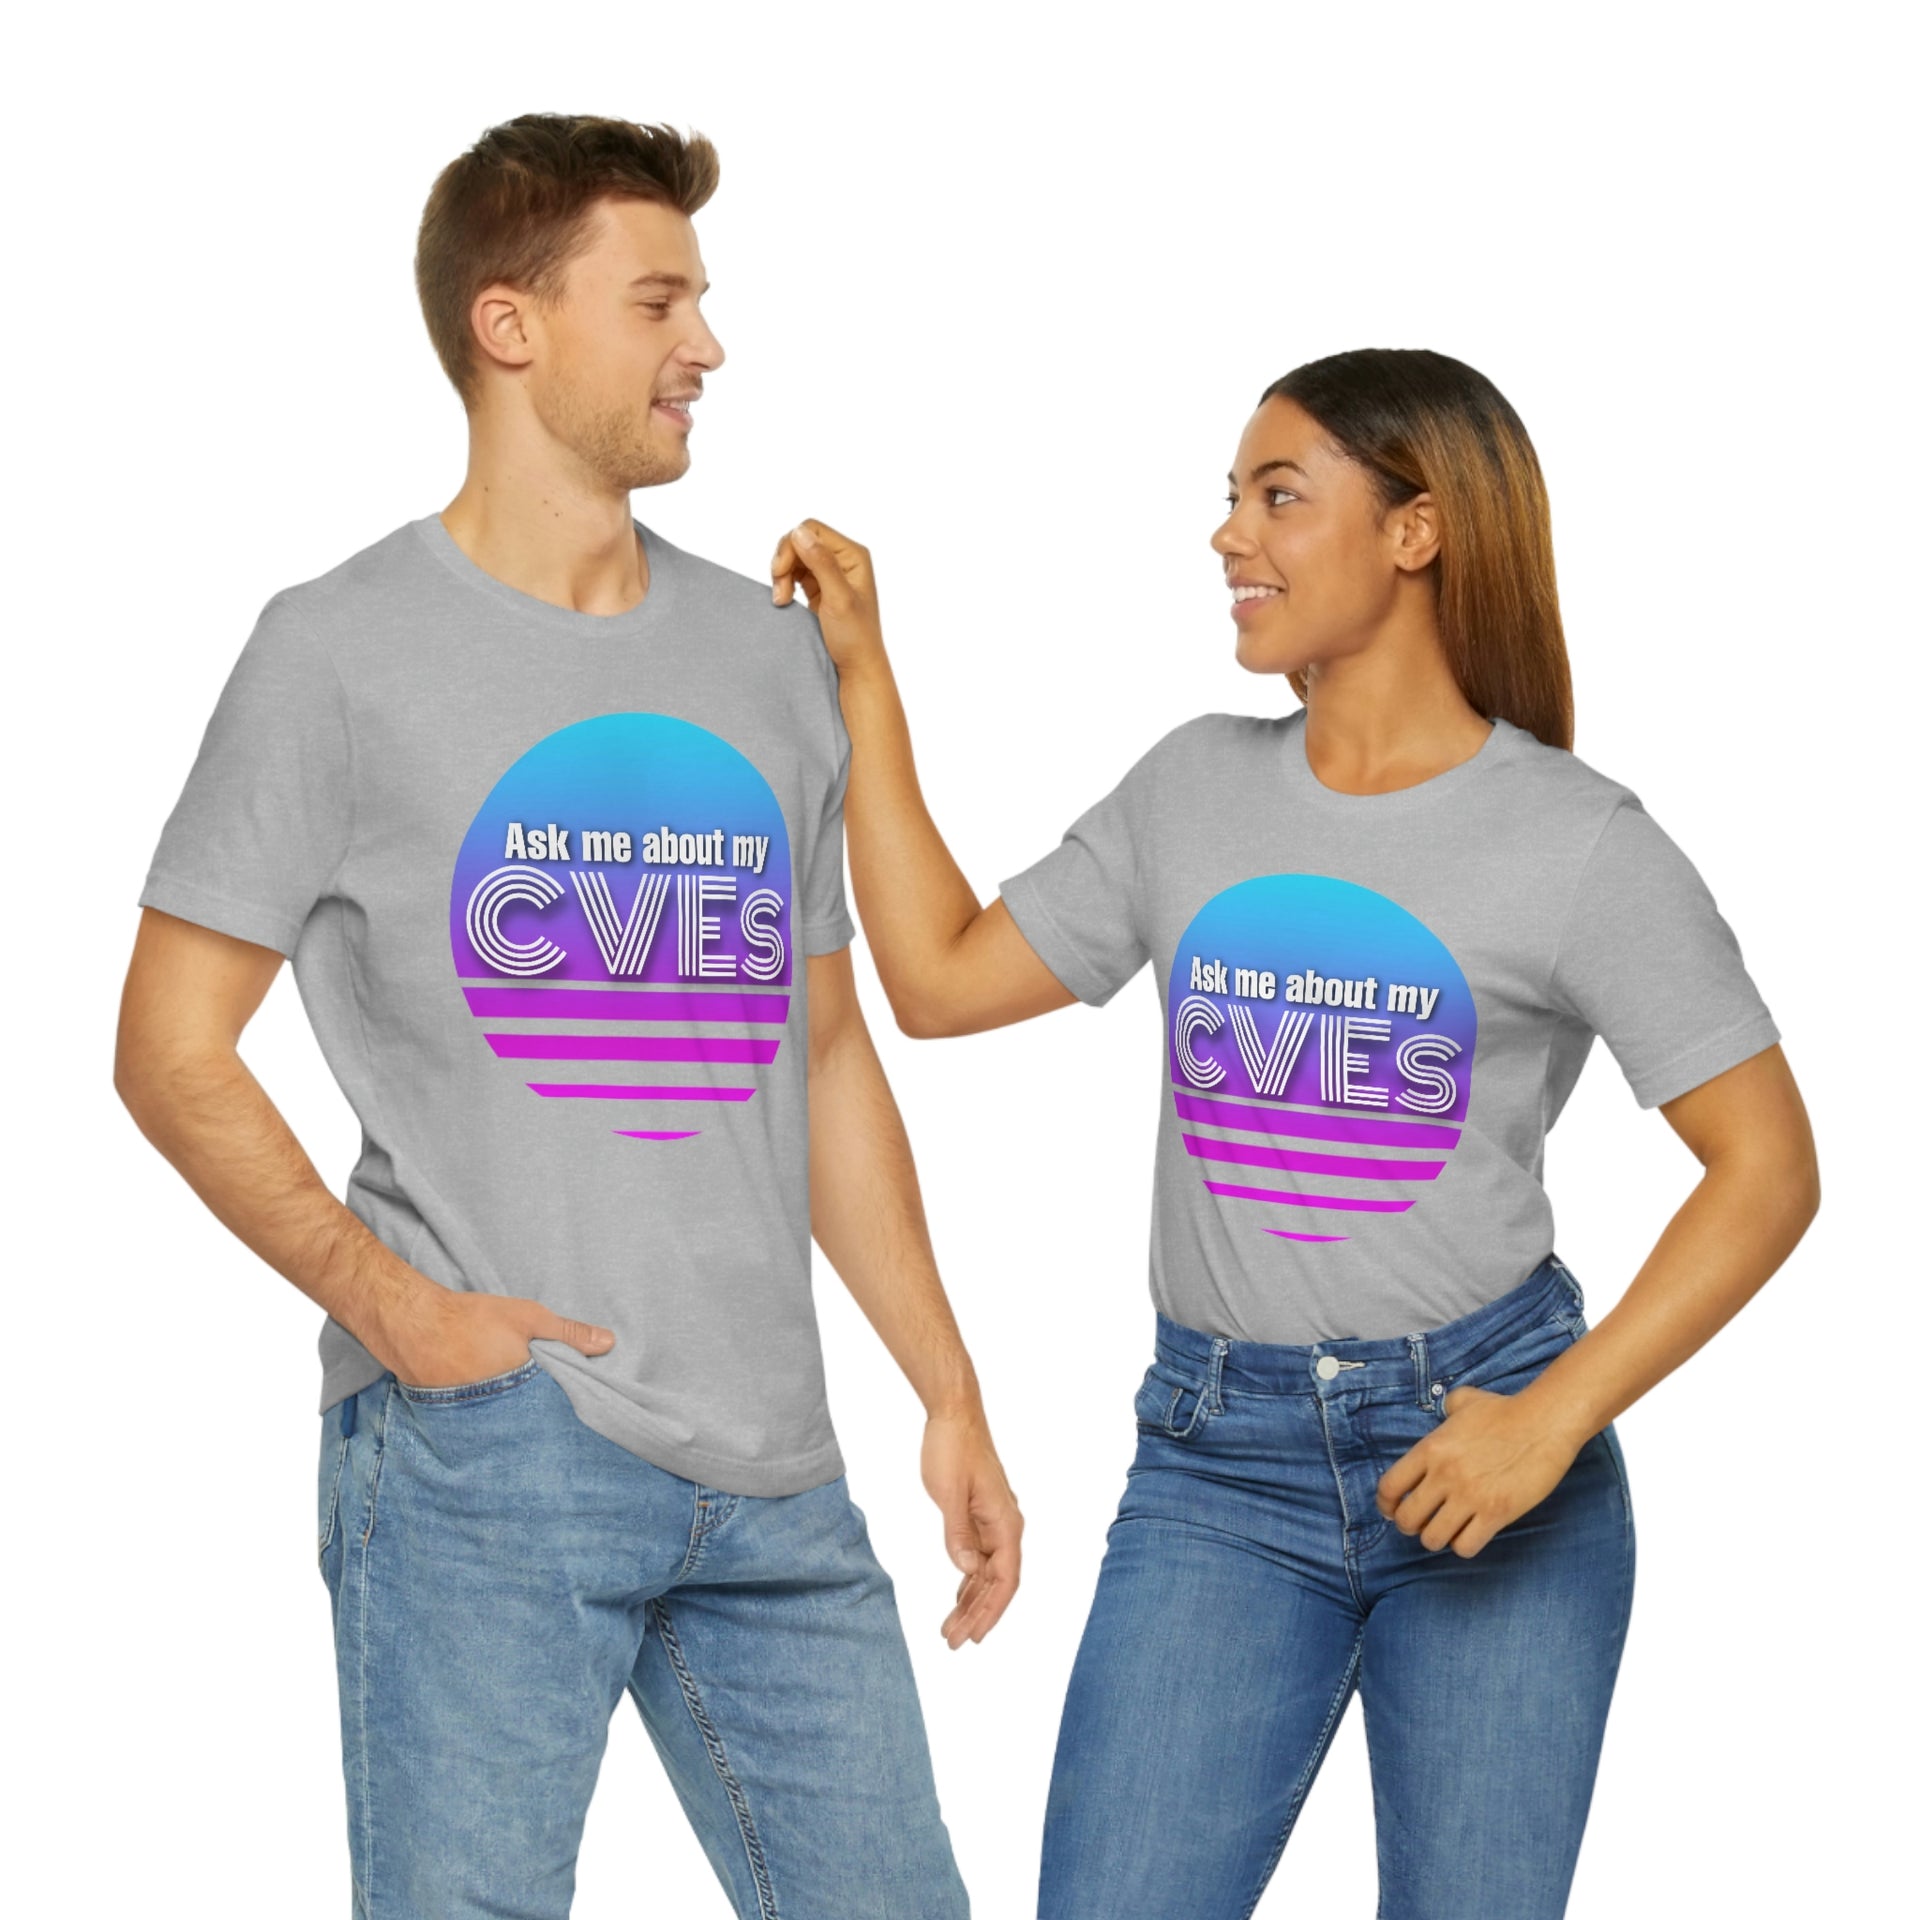 Ask about my CVEs Unisex Tee